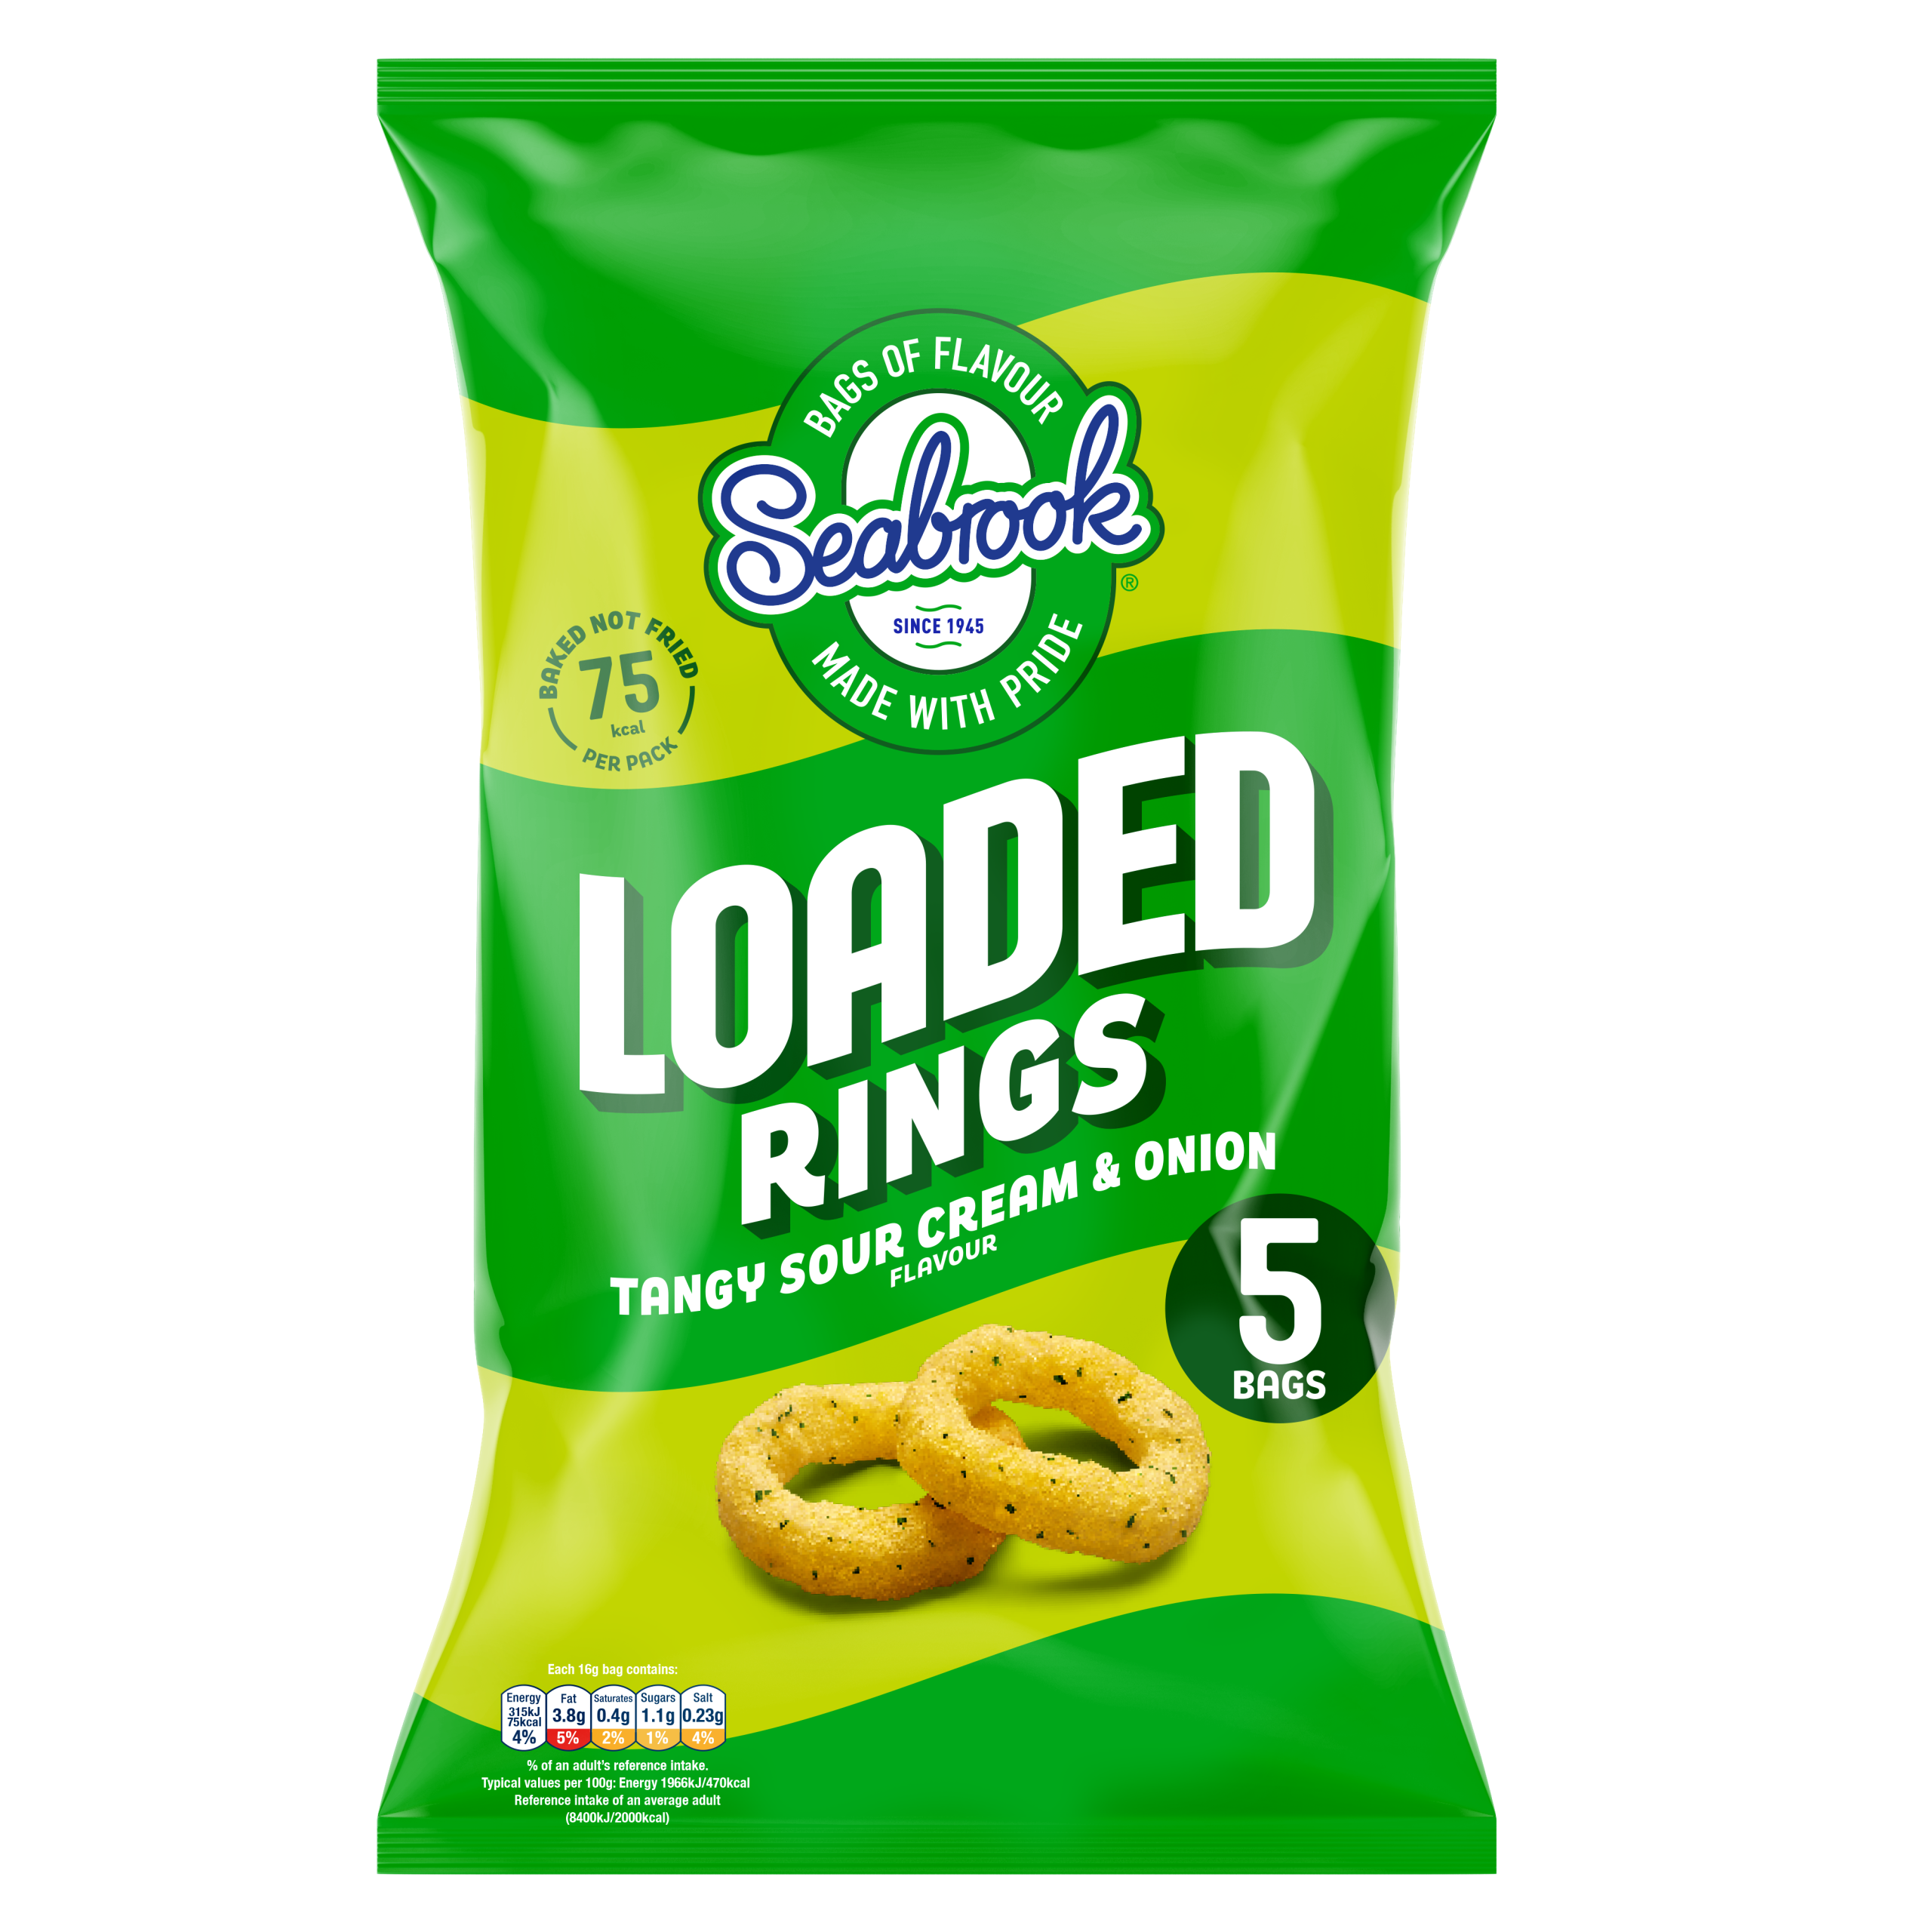 Calbee UK revamps Loaded range with new Loaded Rings